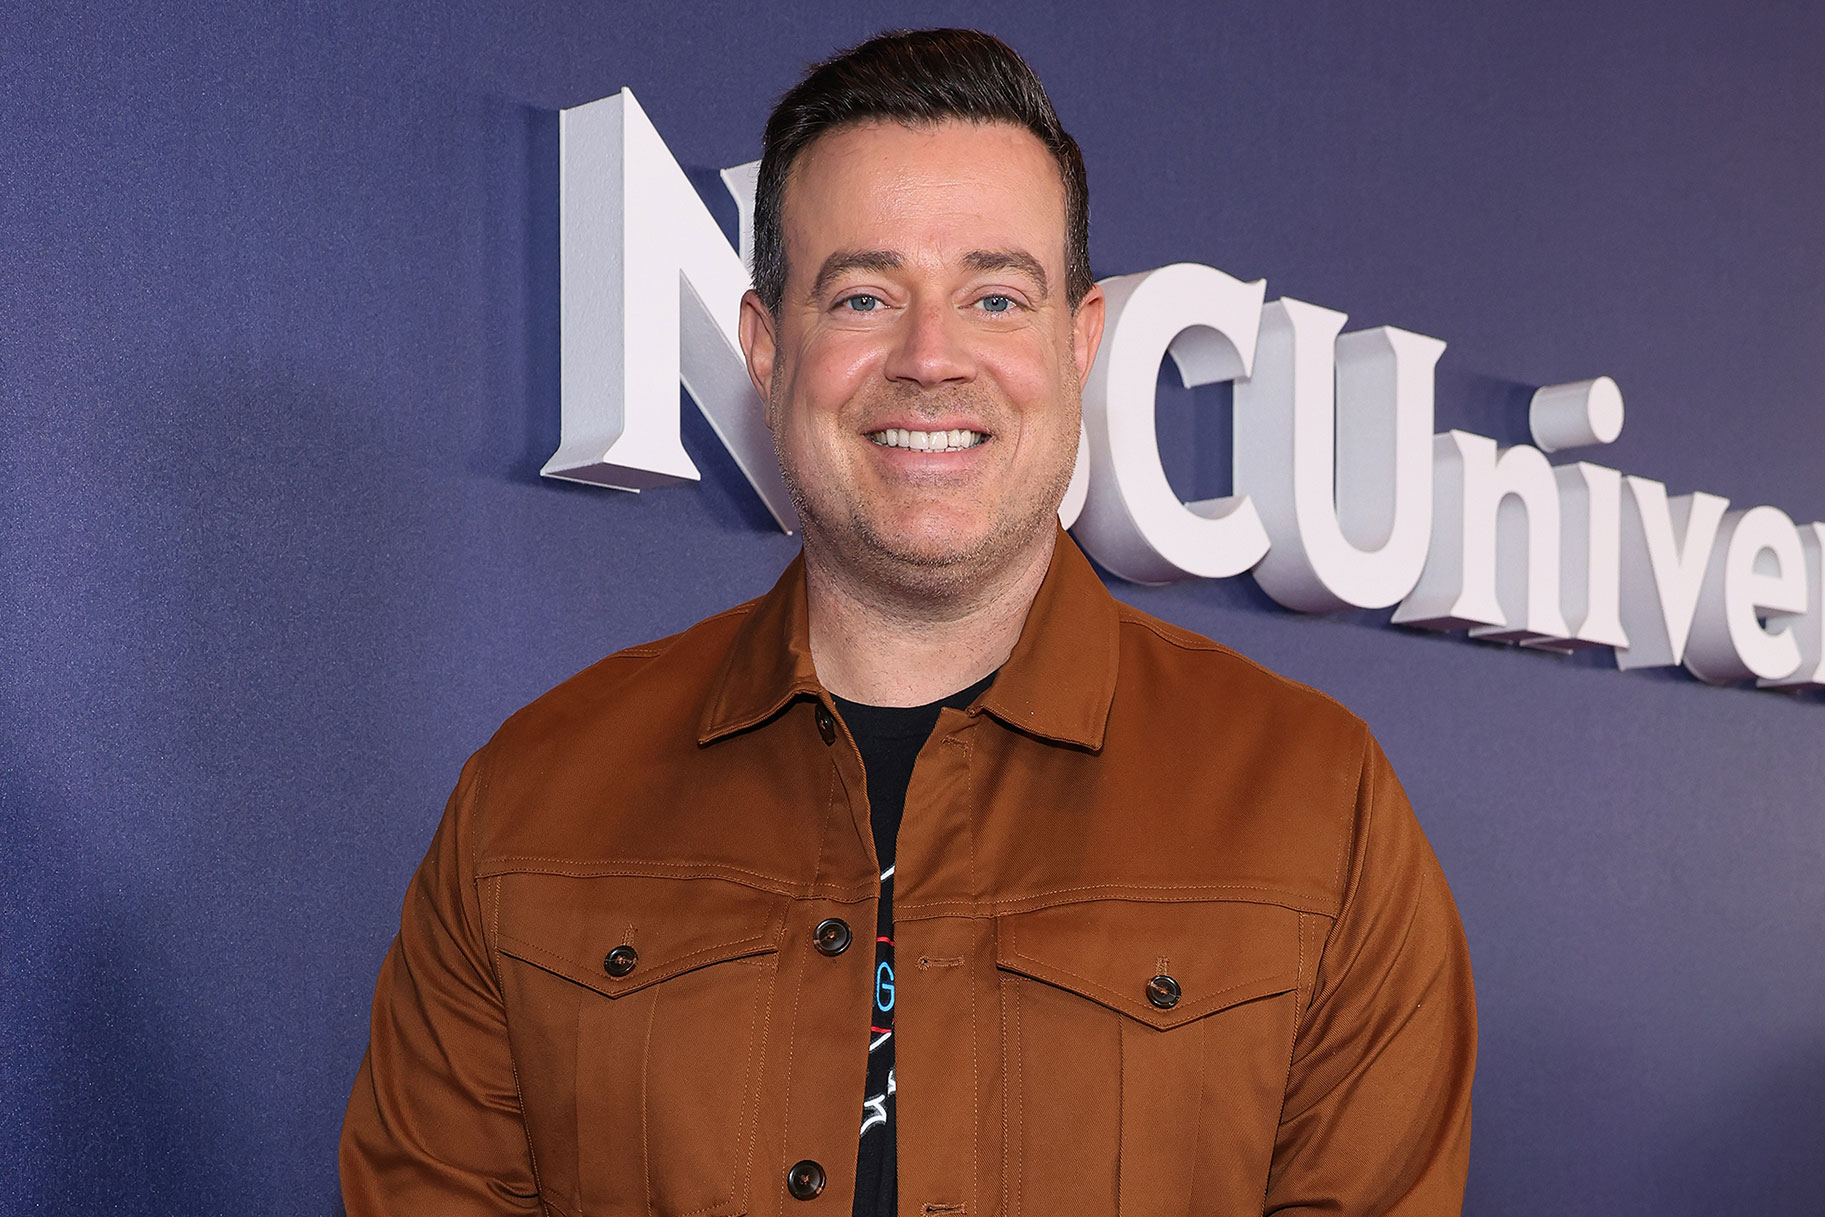 Carson Daly smiling as he stands on an NBC red carpet